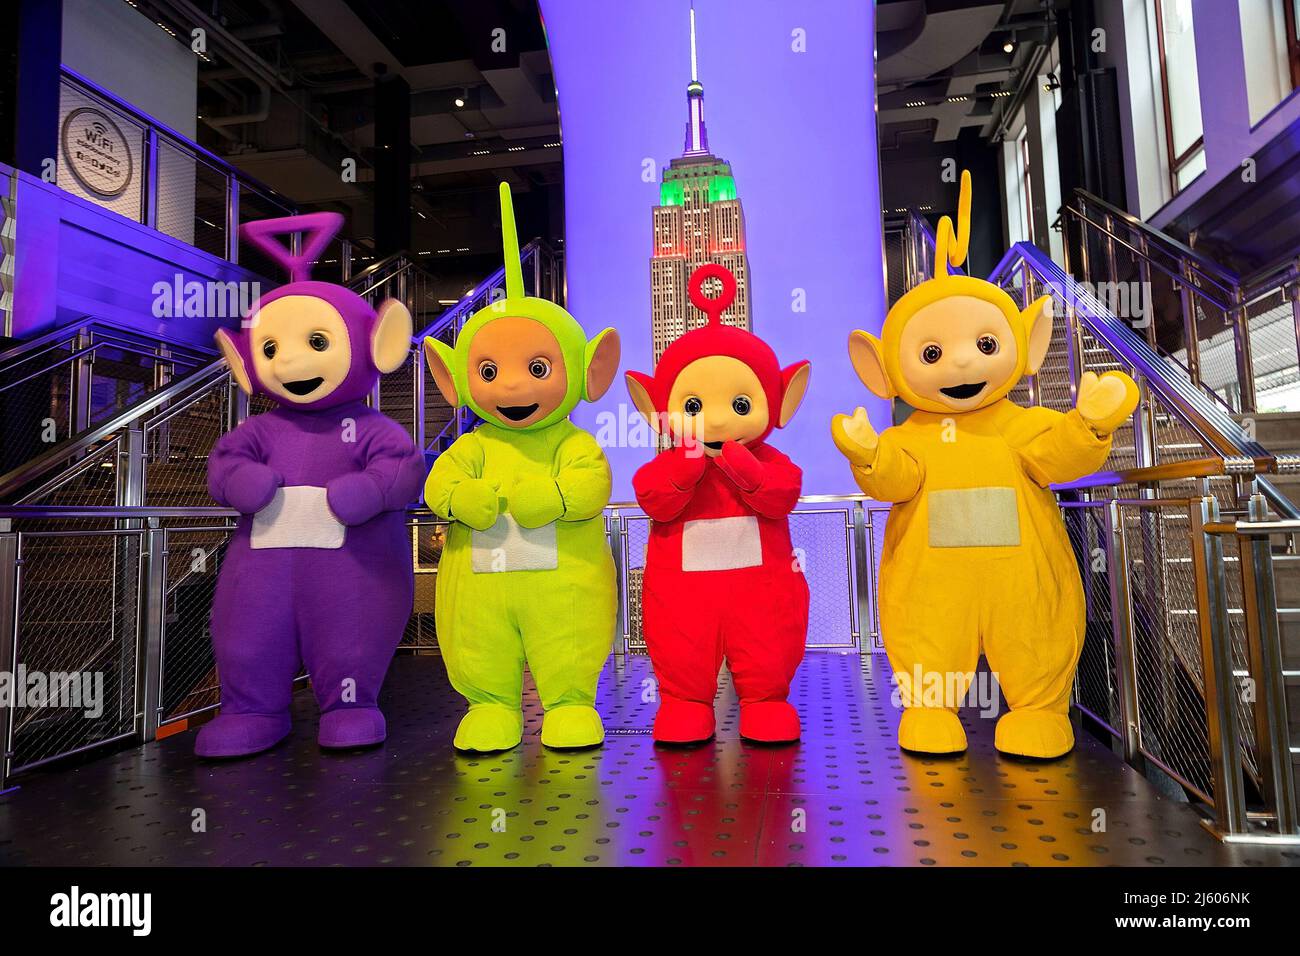 New York, NY, USA. 26th Apr, 2022. Tinky Winky, Dipsy, Po, Laa-Laa at the Teletubbies ceremonial lighting of the Empire State Building in their iconic colors of purple, green, yellow and red in celebration of their 25th Anniversary year at The Empire State Building. Credit: Steve Mack/Alamy Live News Stock Photo